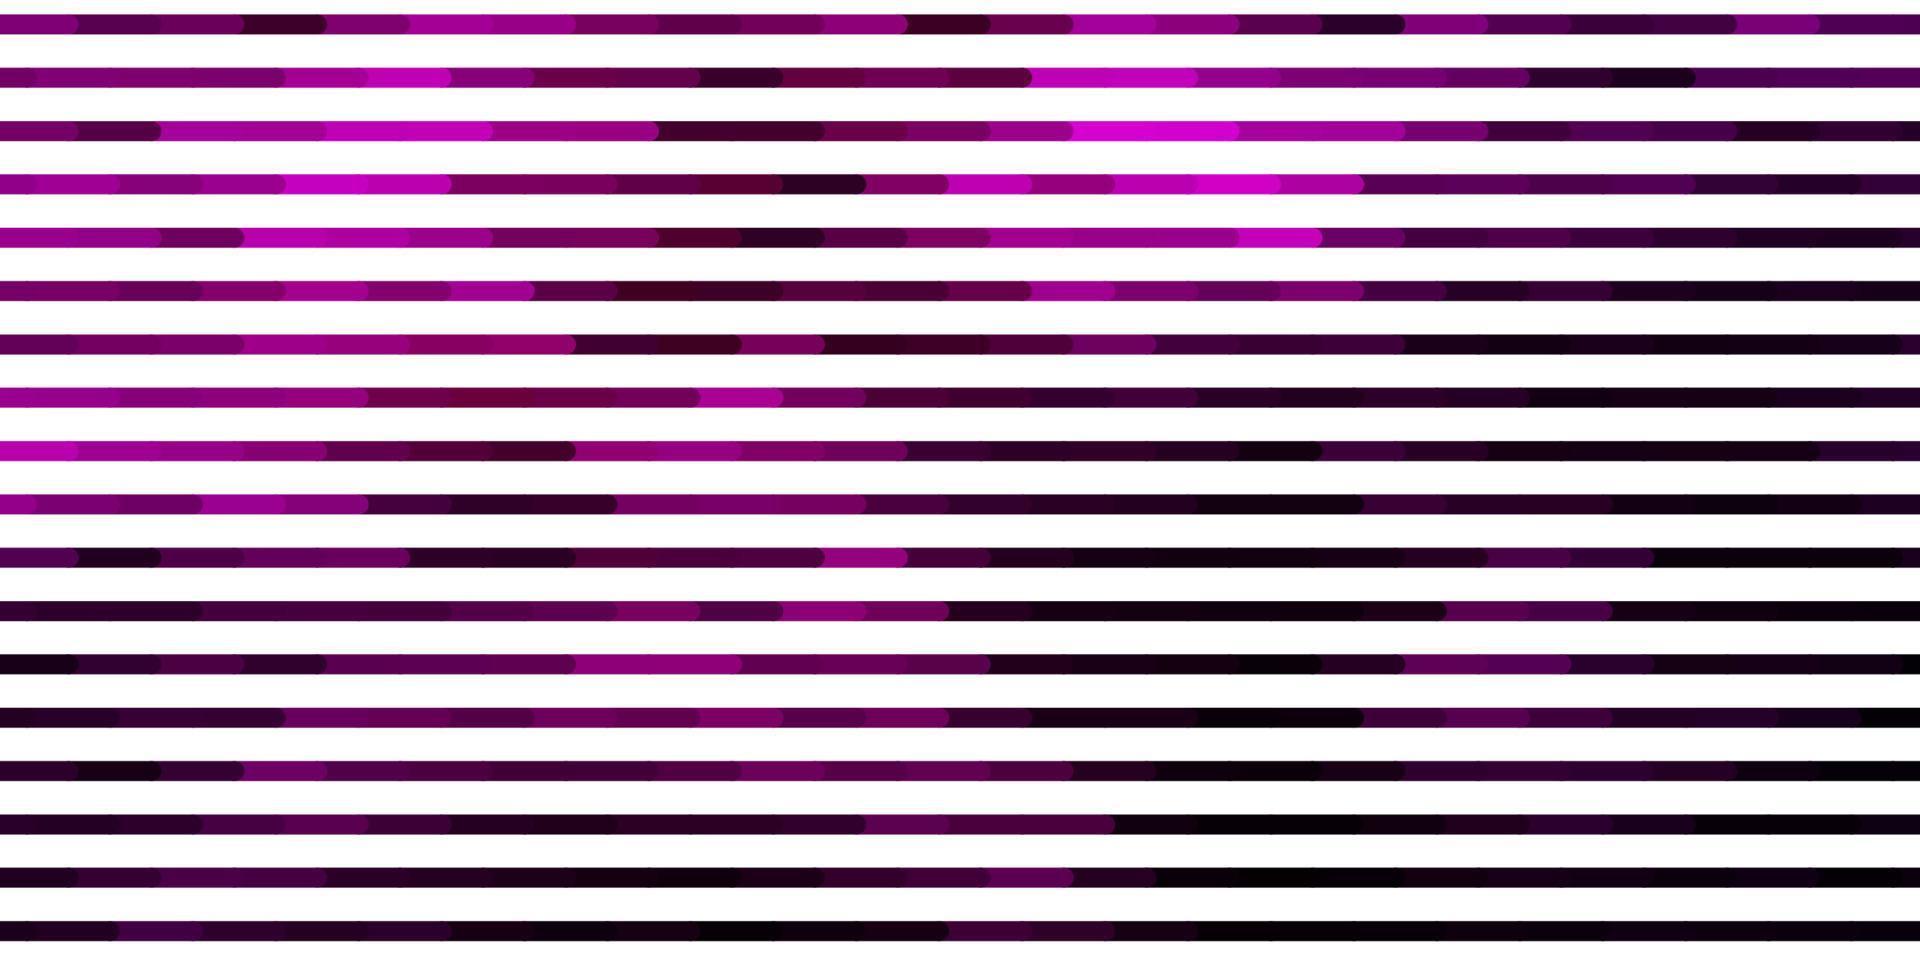 Dark Pink vector layout with lines.